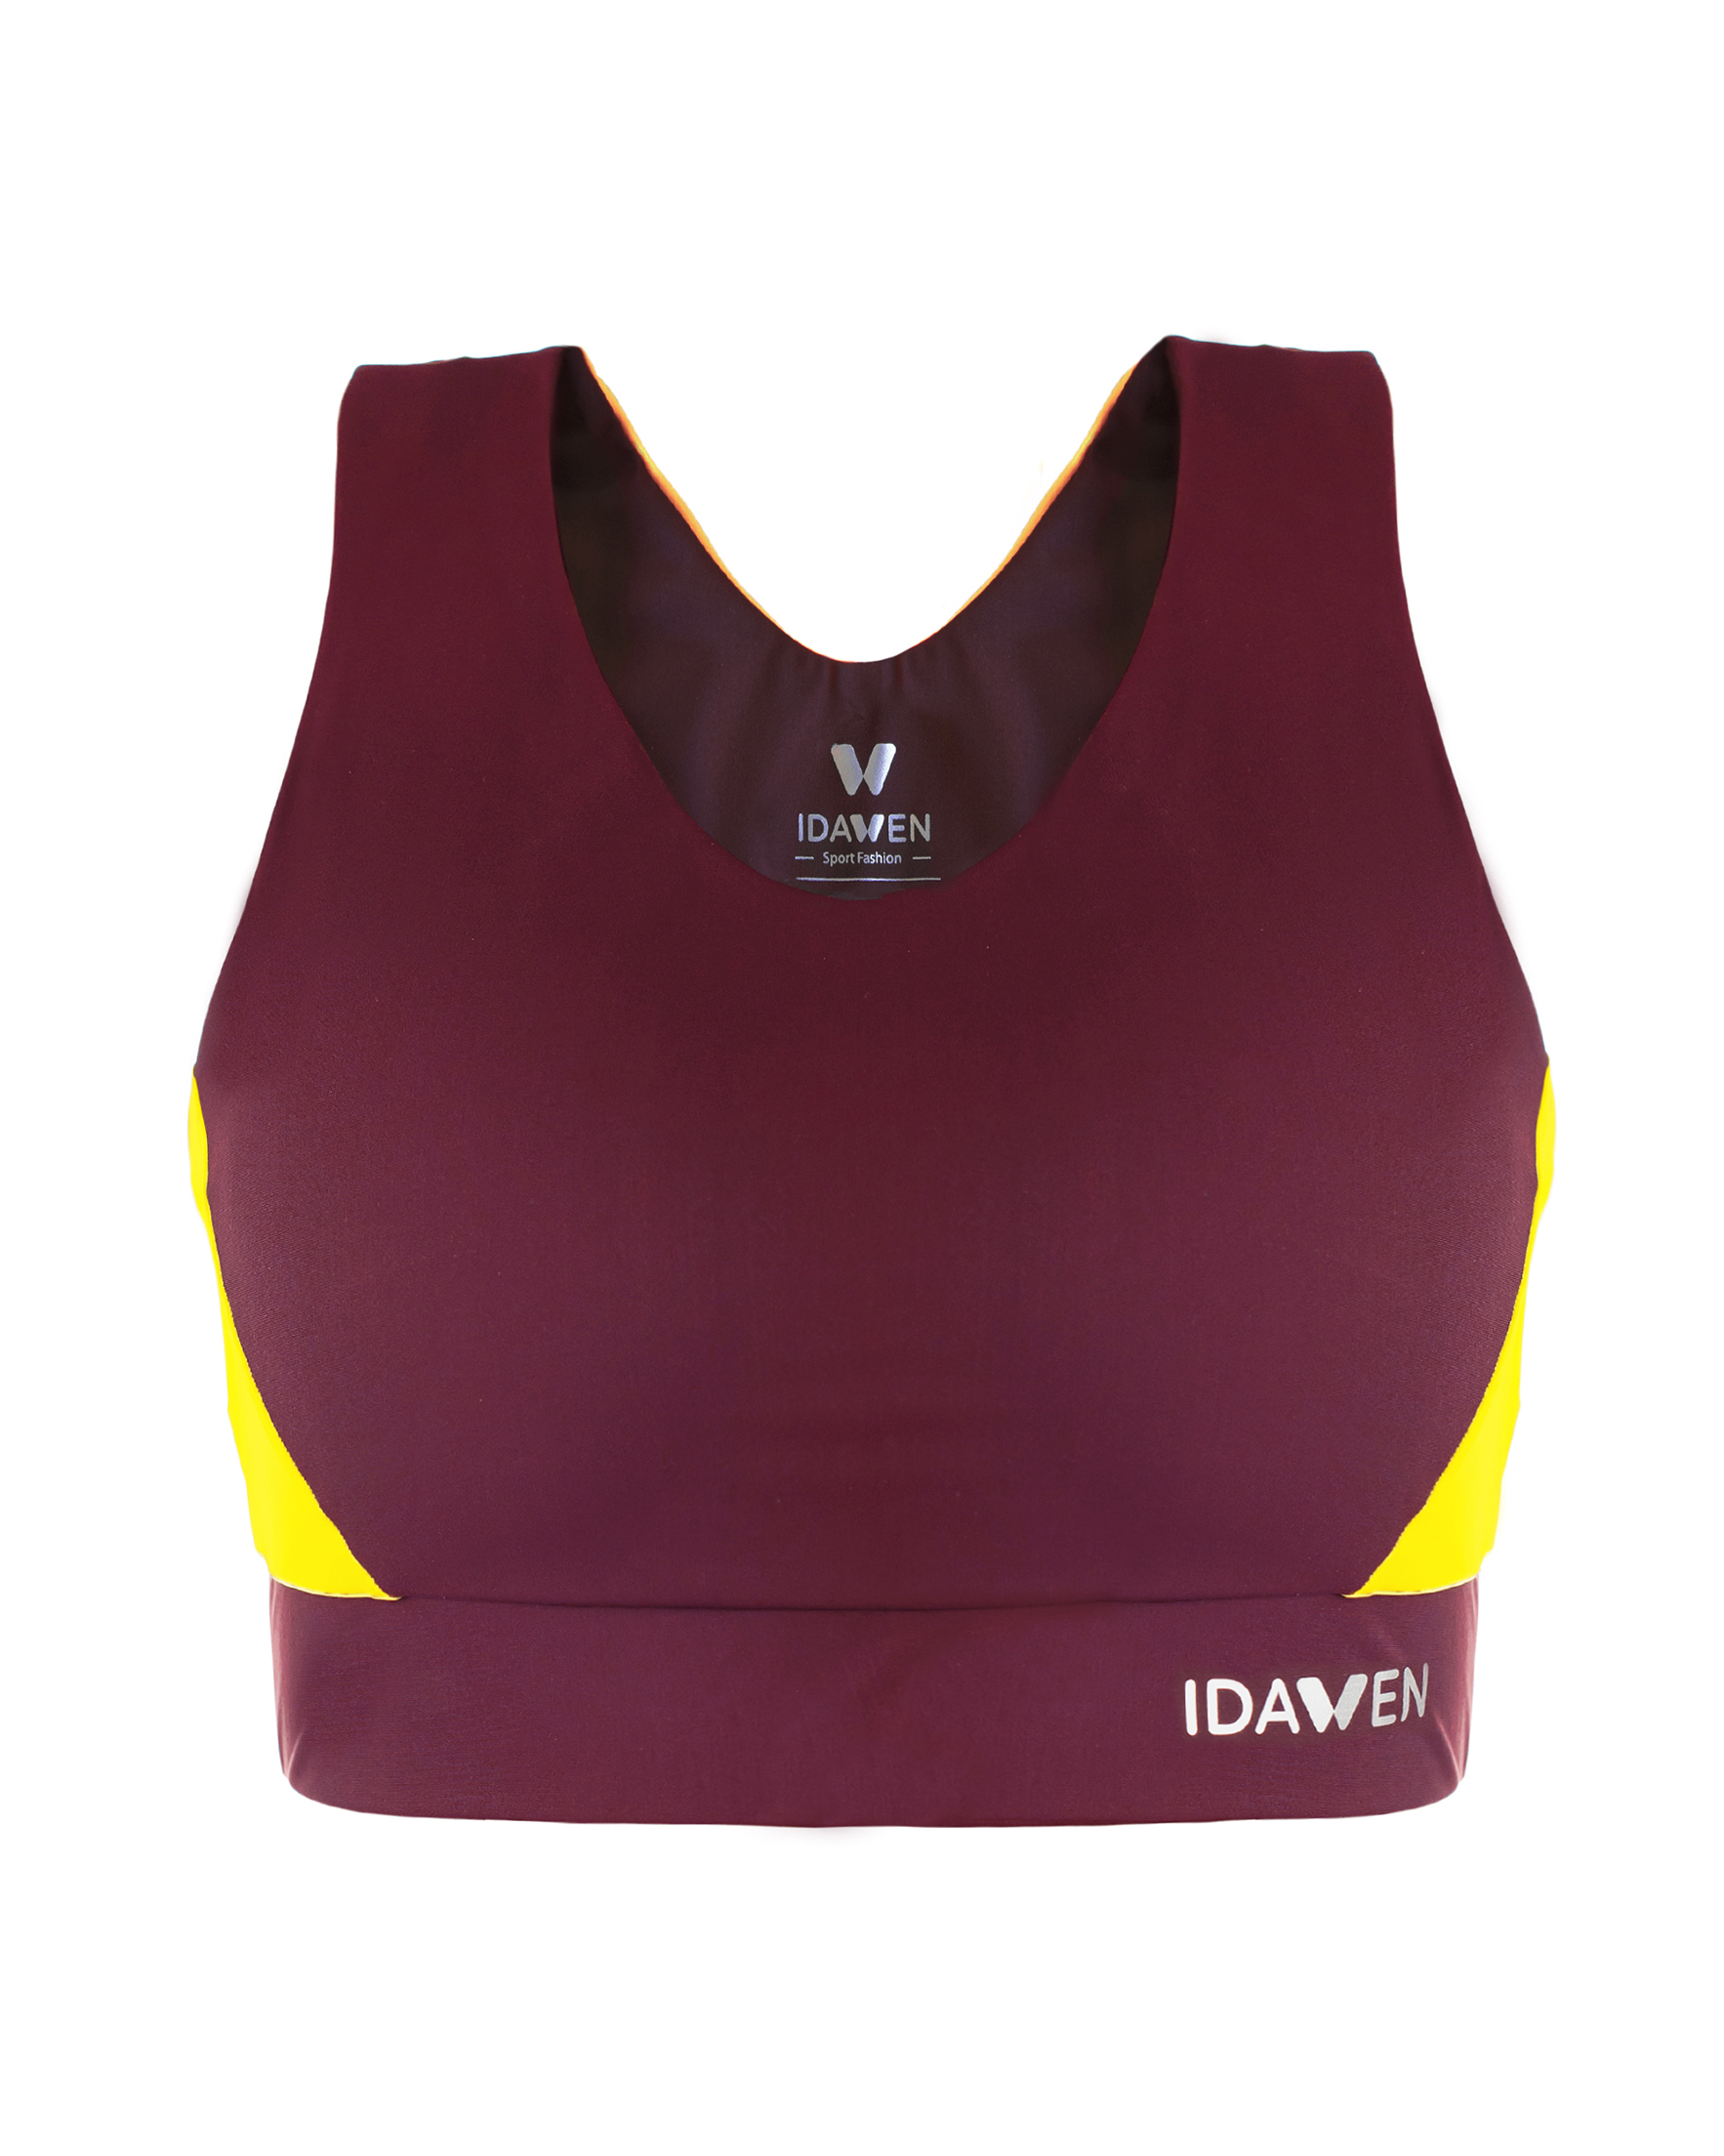 SPORT BRA FOR WOMAN Sport bra for woman, double layer of fabric